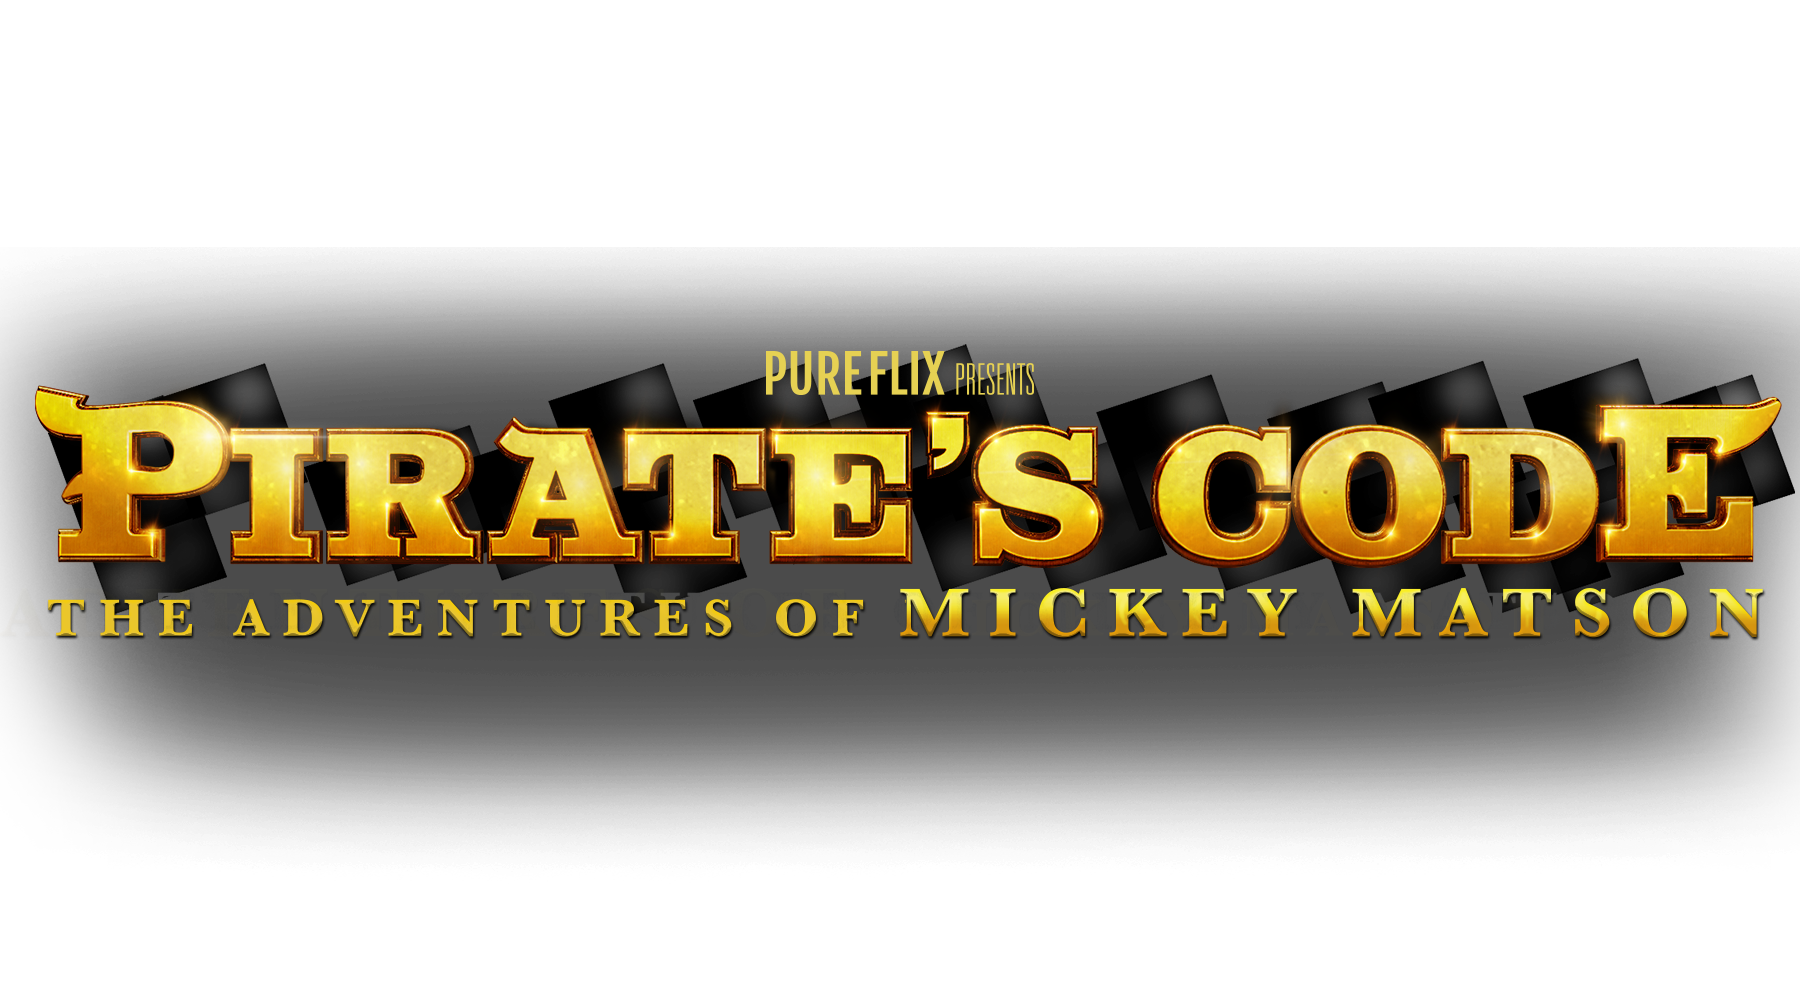 Pirate's Code: The Adventures of Mickey Matson' rollout to benefit